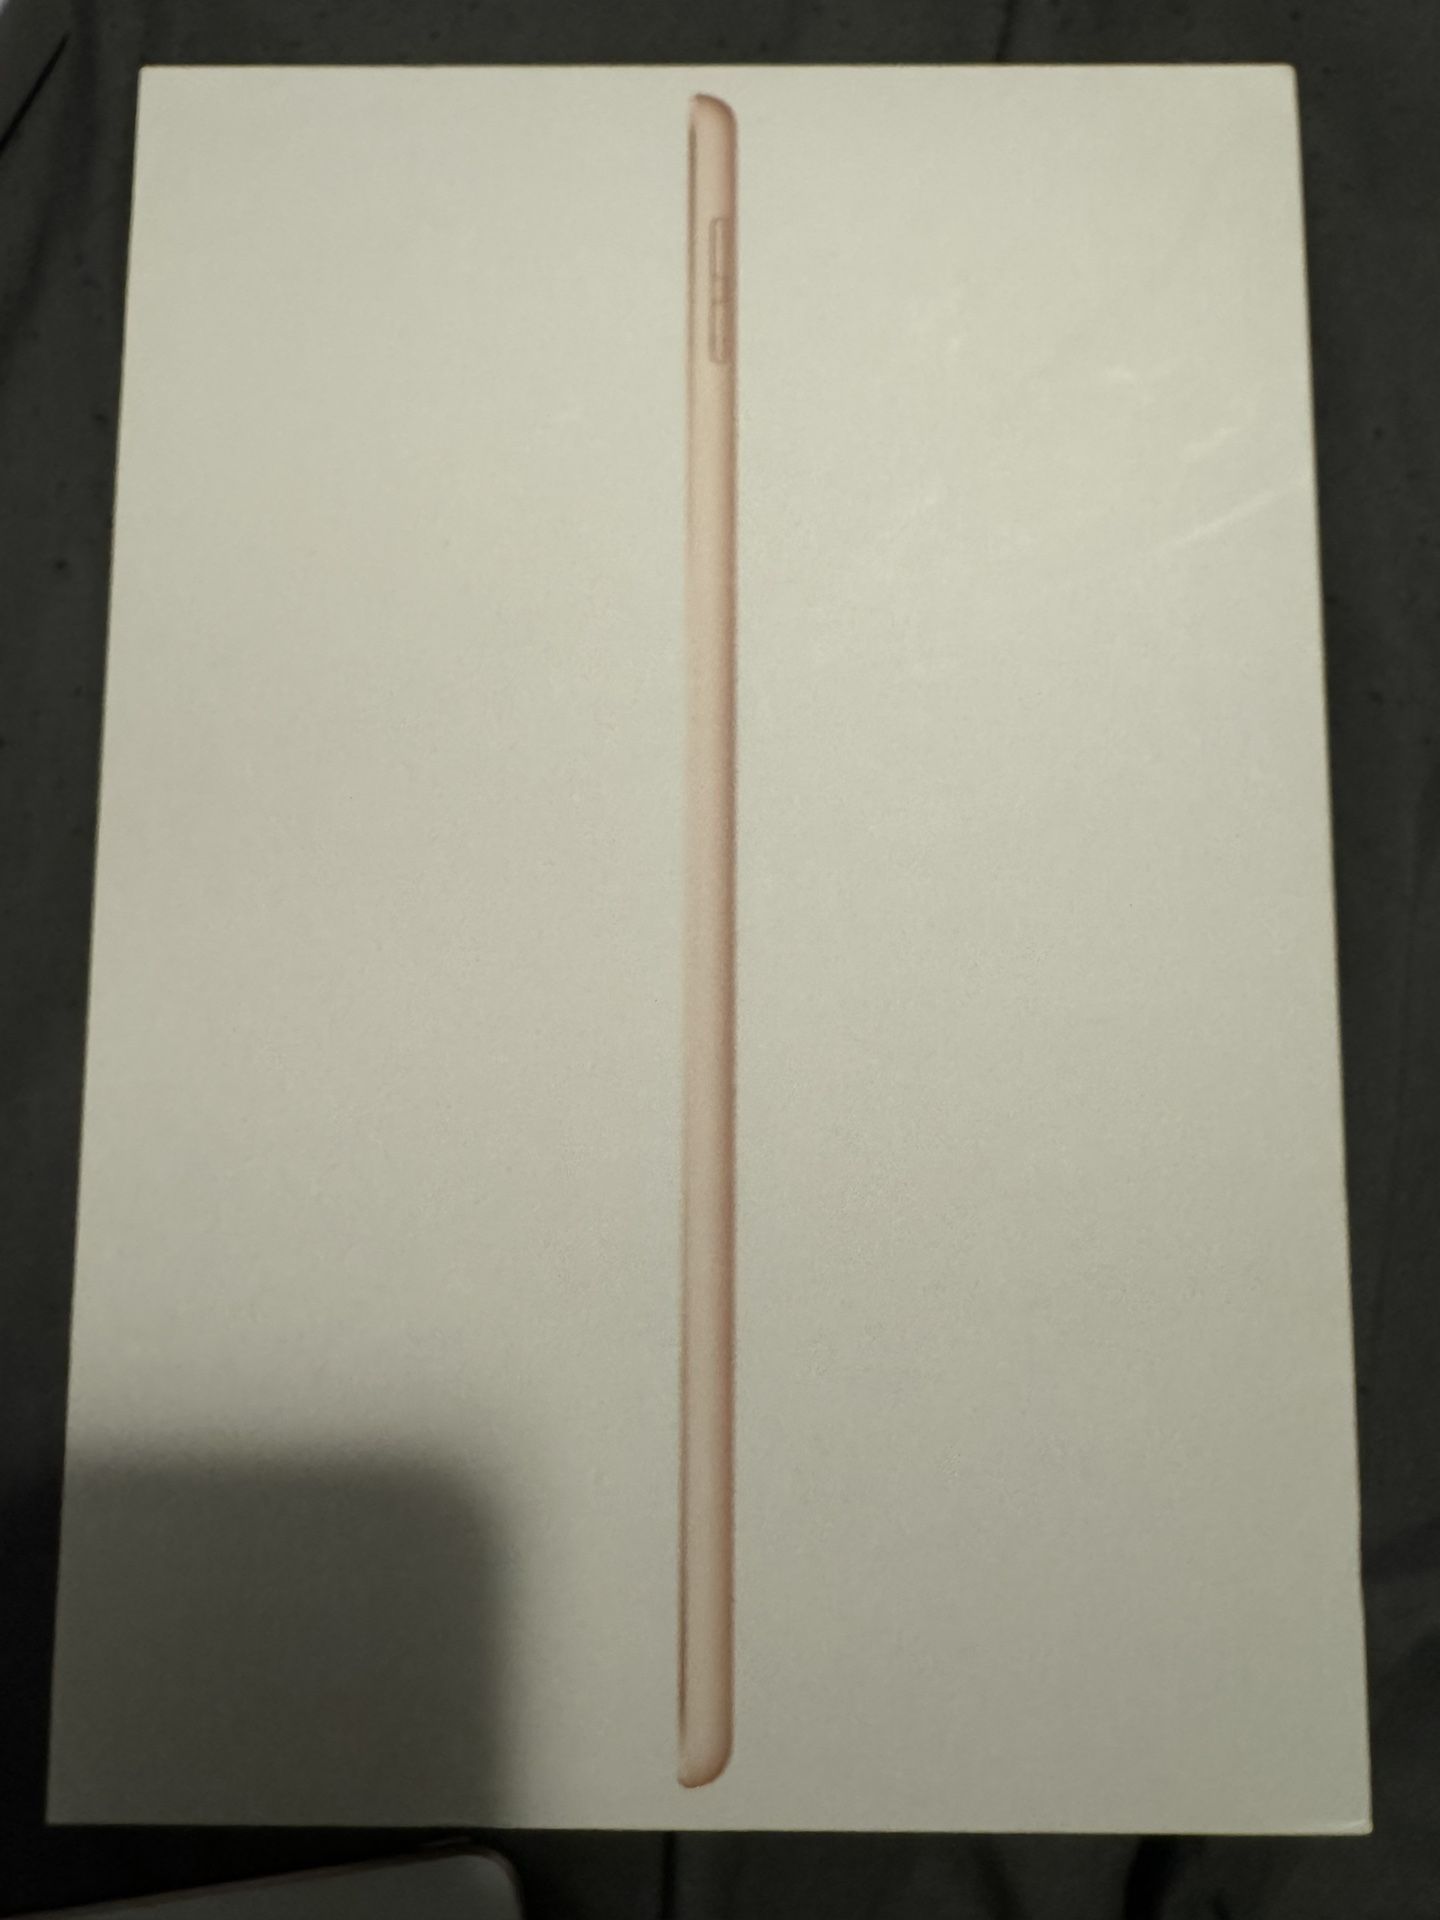 iPad 8th Generation ROSE GOLD 32GB WITH APPLE PENCIL